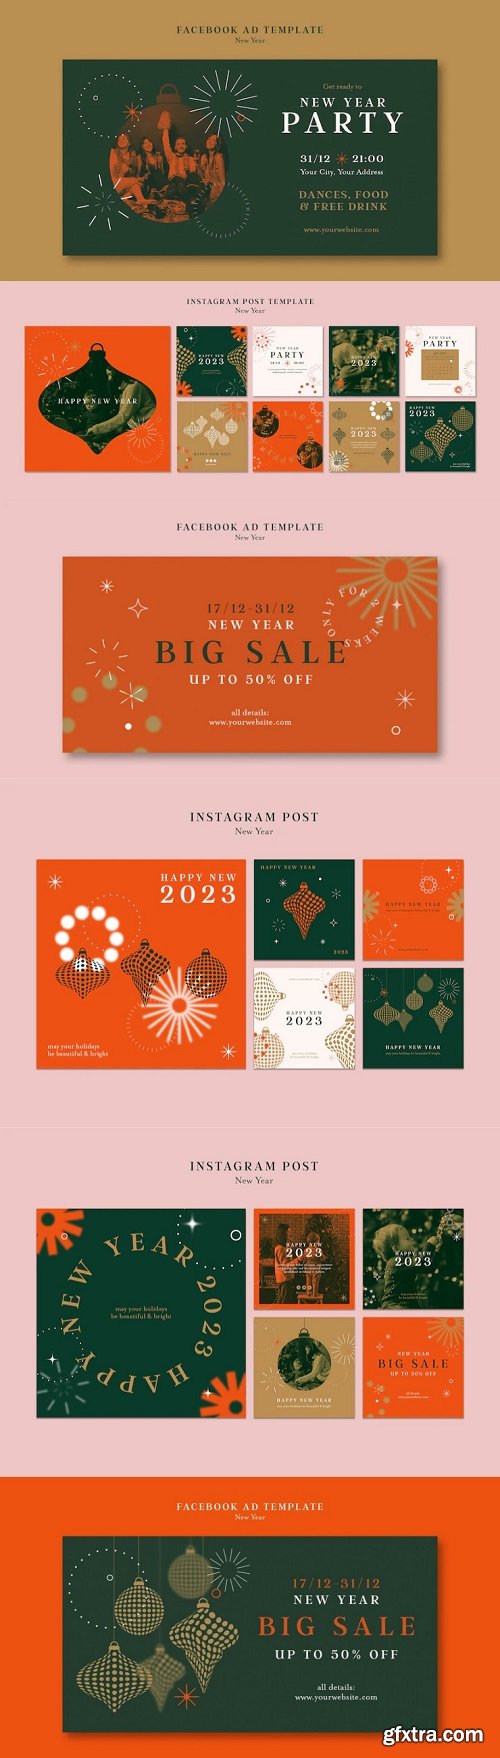 Flat design new year template